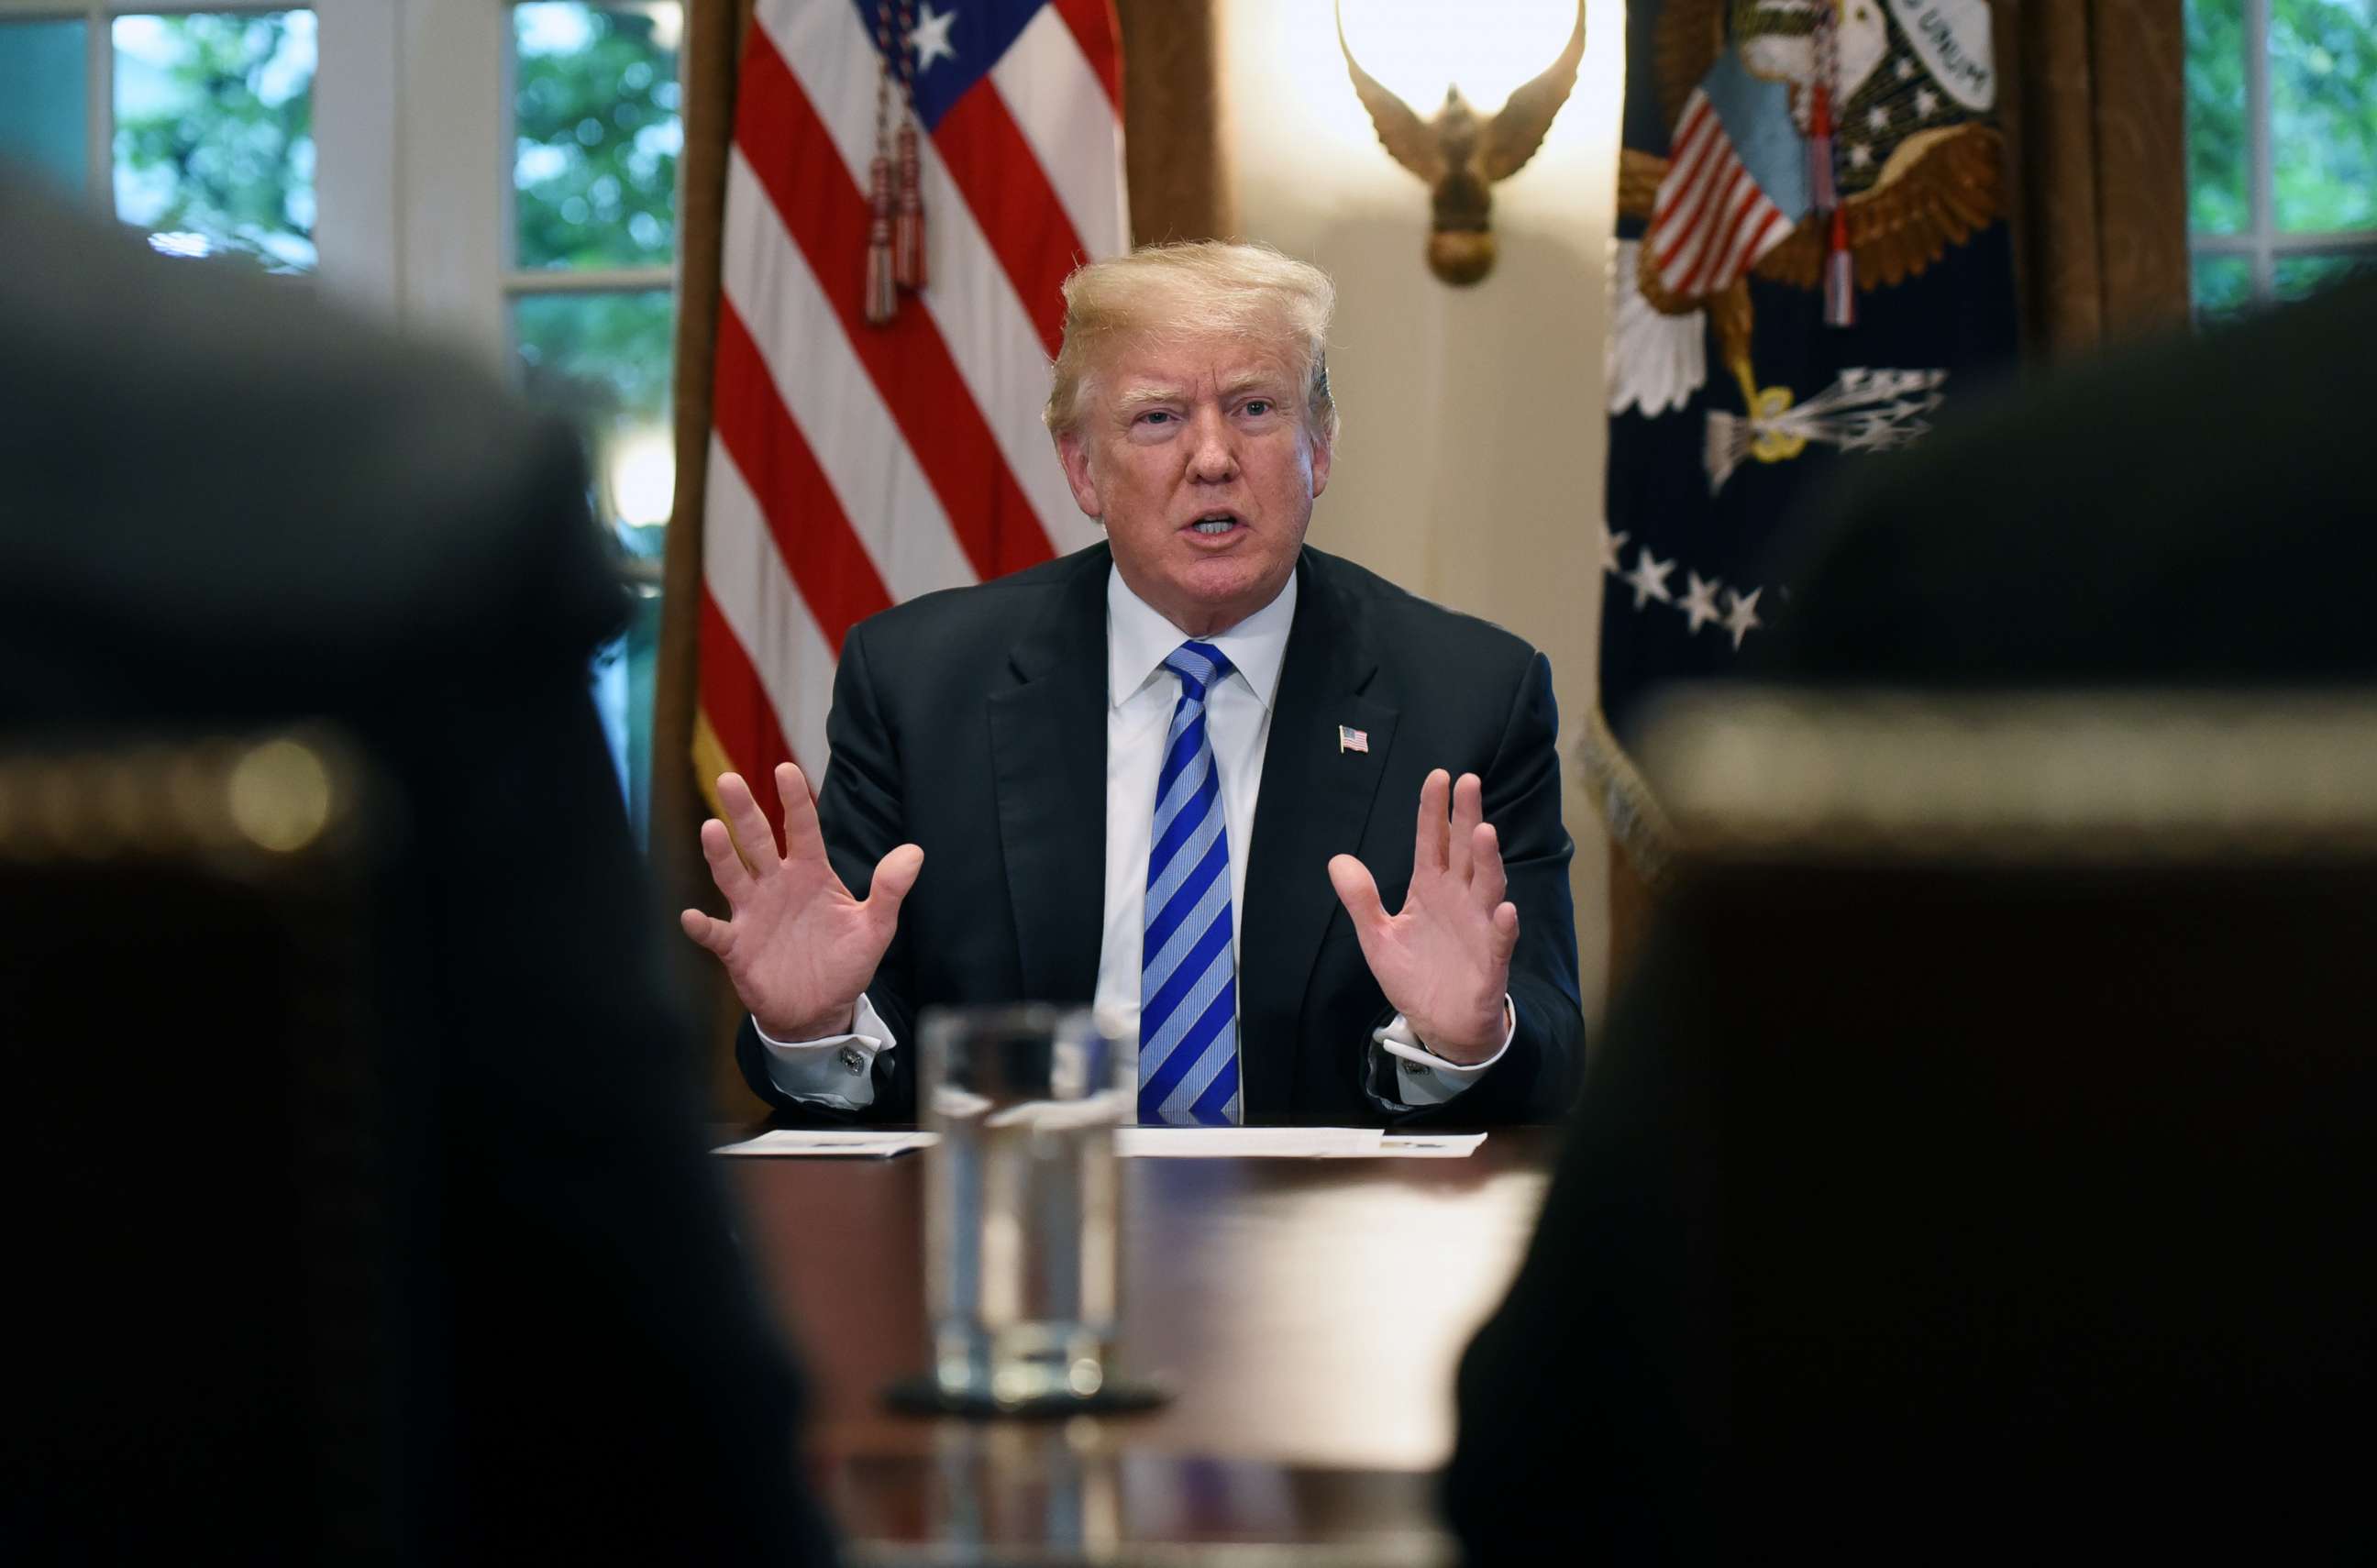 PHOTO: President Donald Trump speaks during a meeting with California leaders and public officials who oppose California's sanctuary policies in the Cabinet Room of the White House, May 16, 2018.